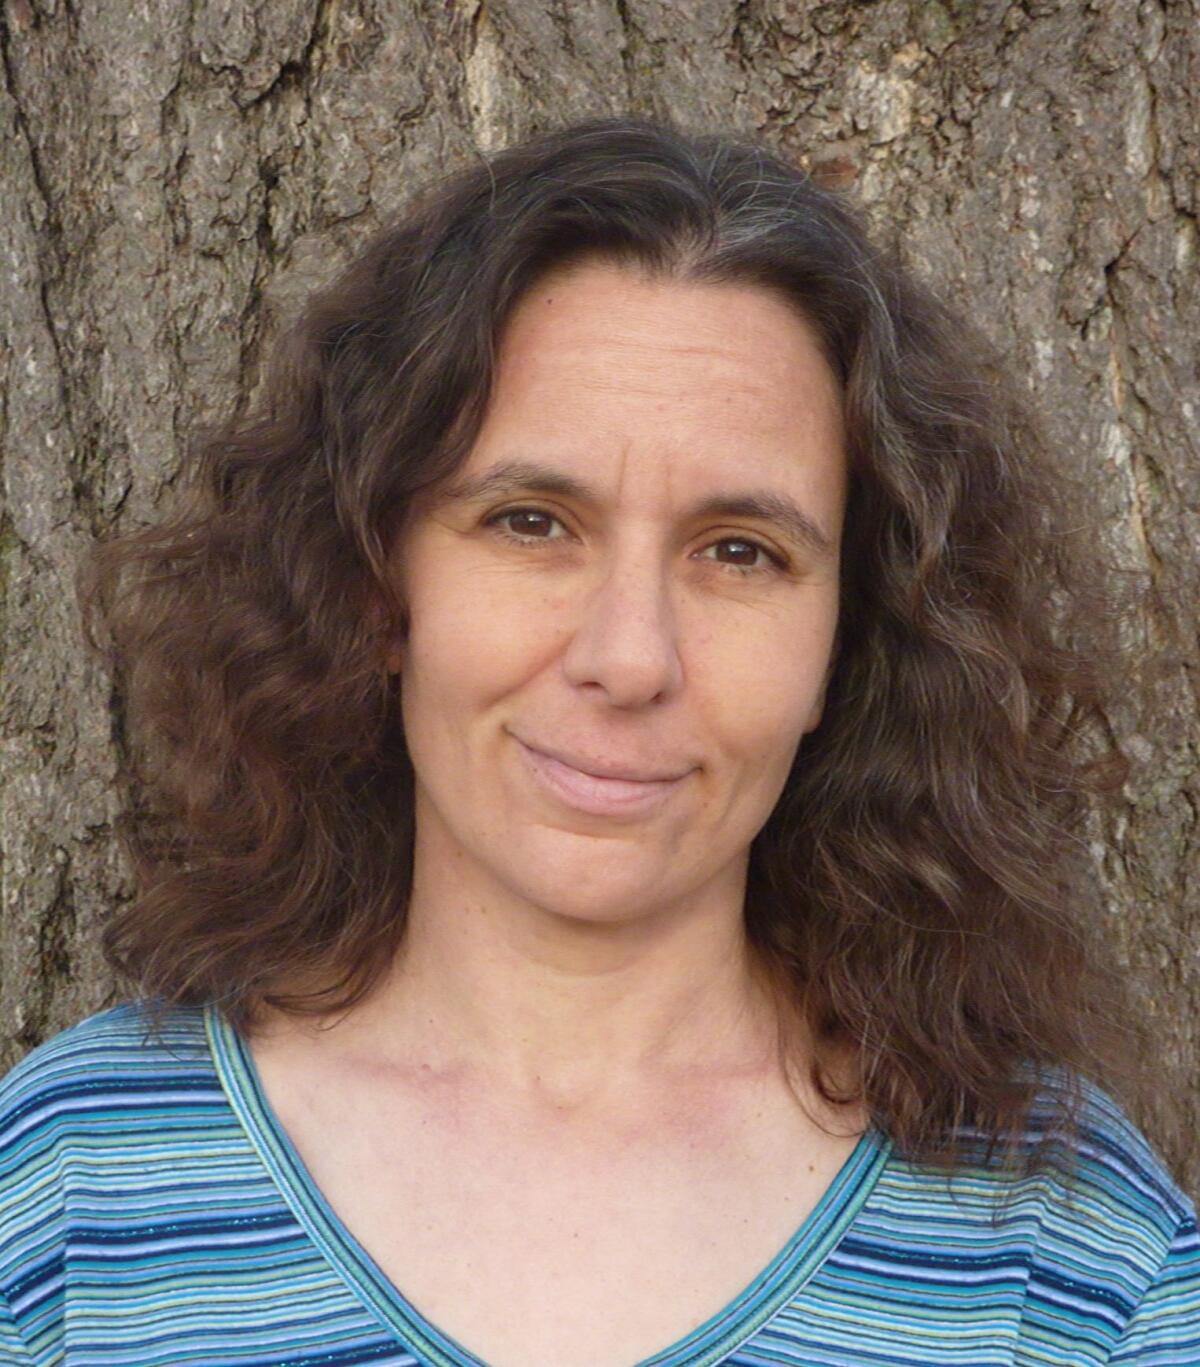 Mara Rockliff specializes in writing children’s books about true stories and has authored more than 75 books.